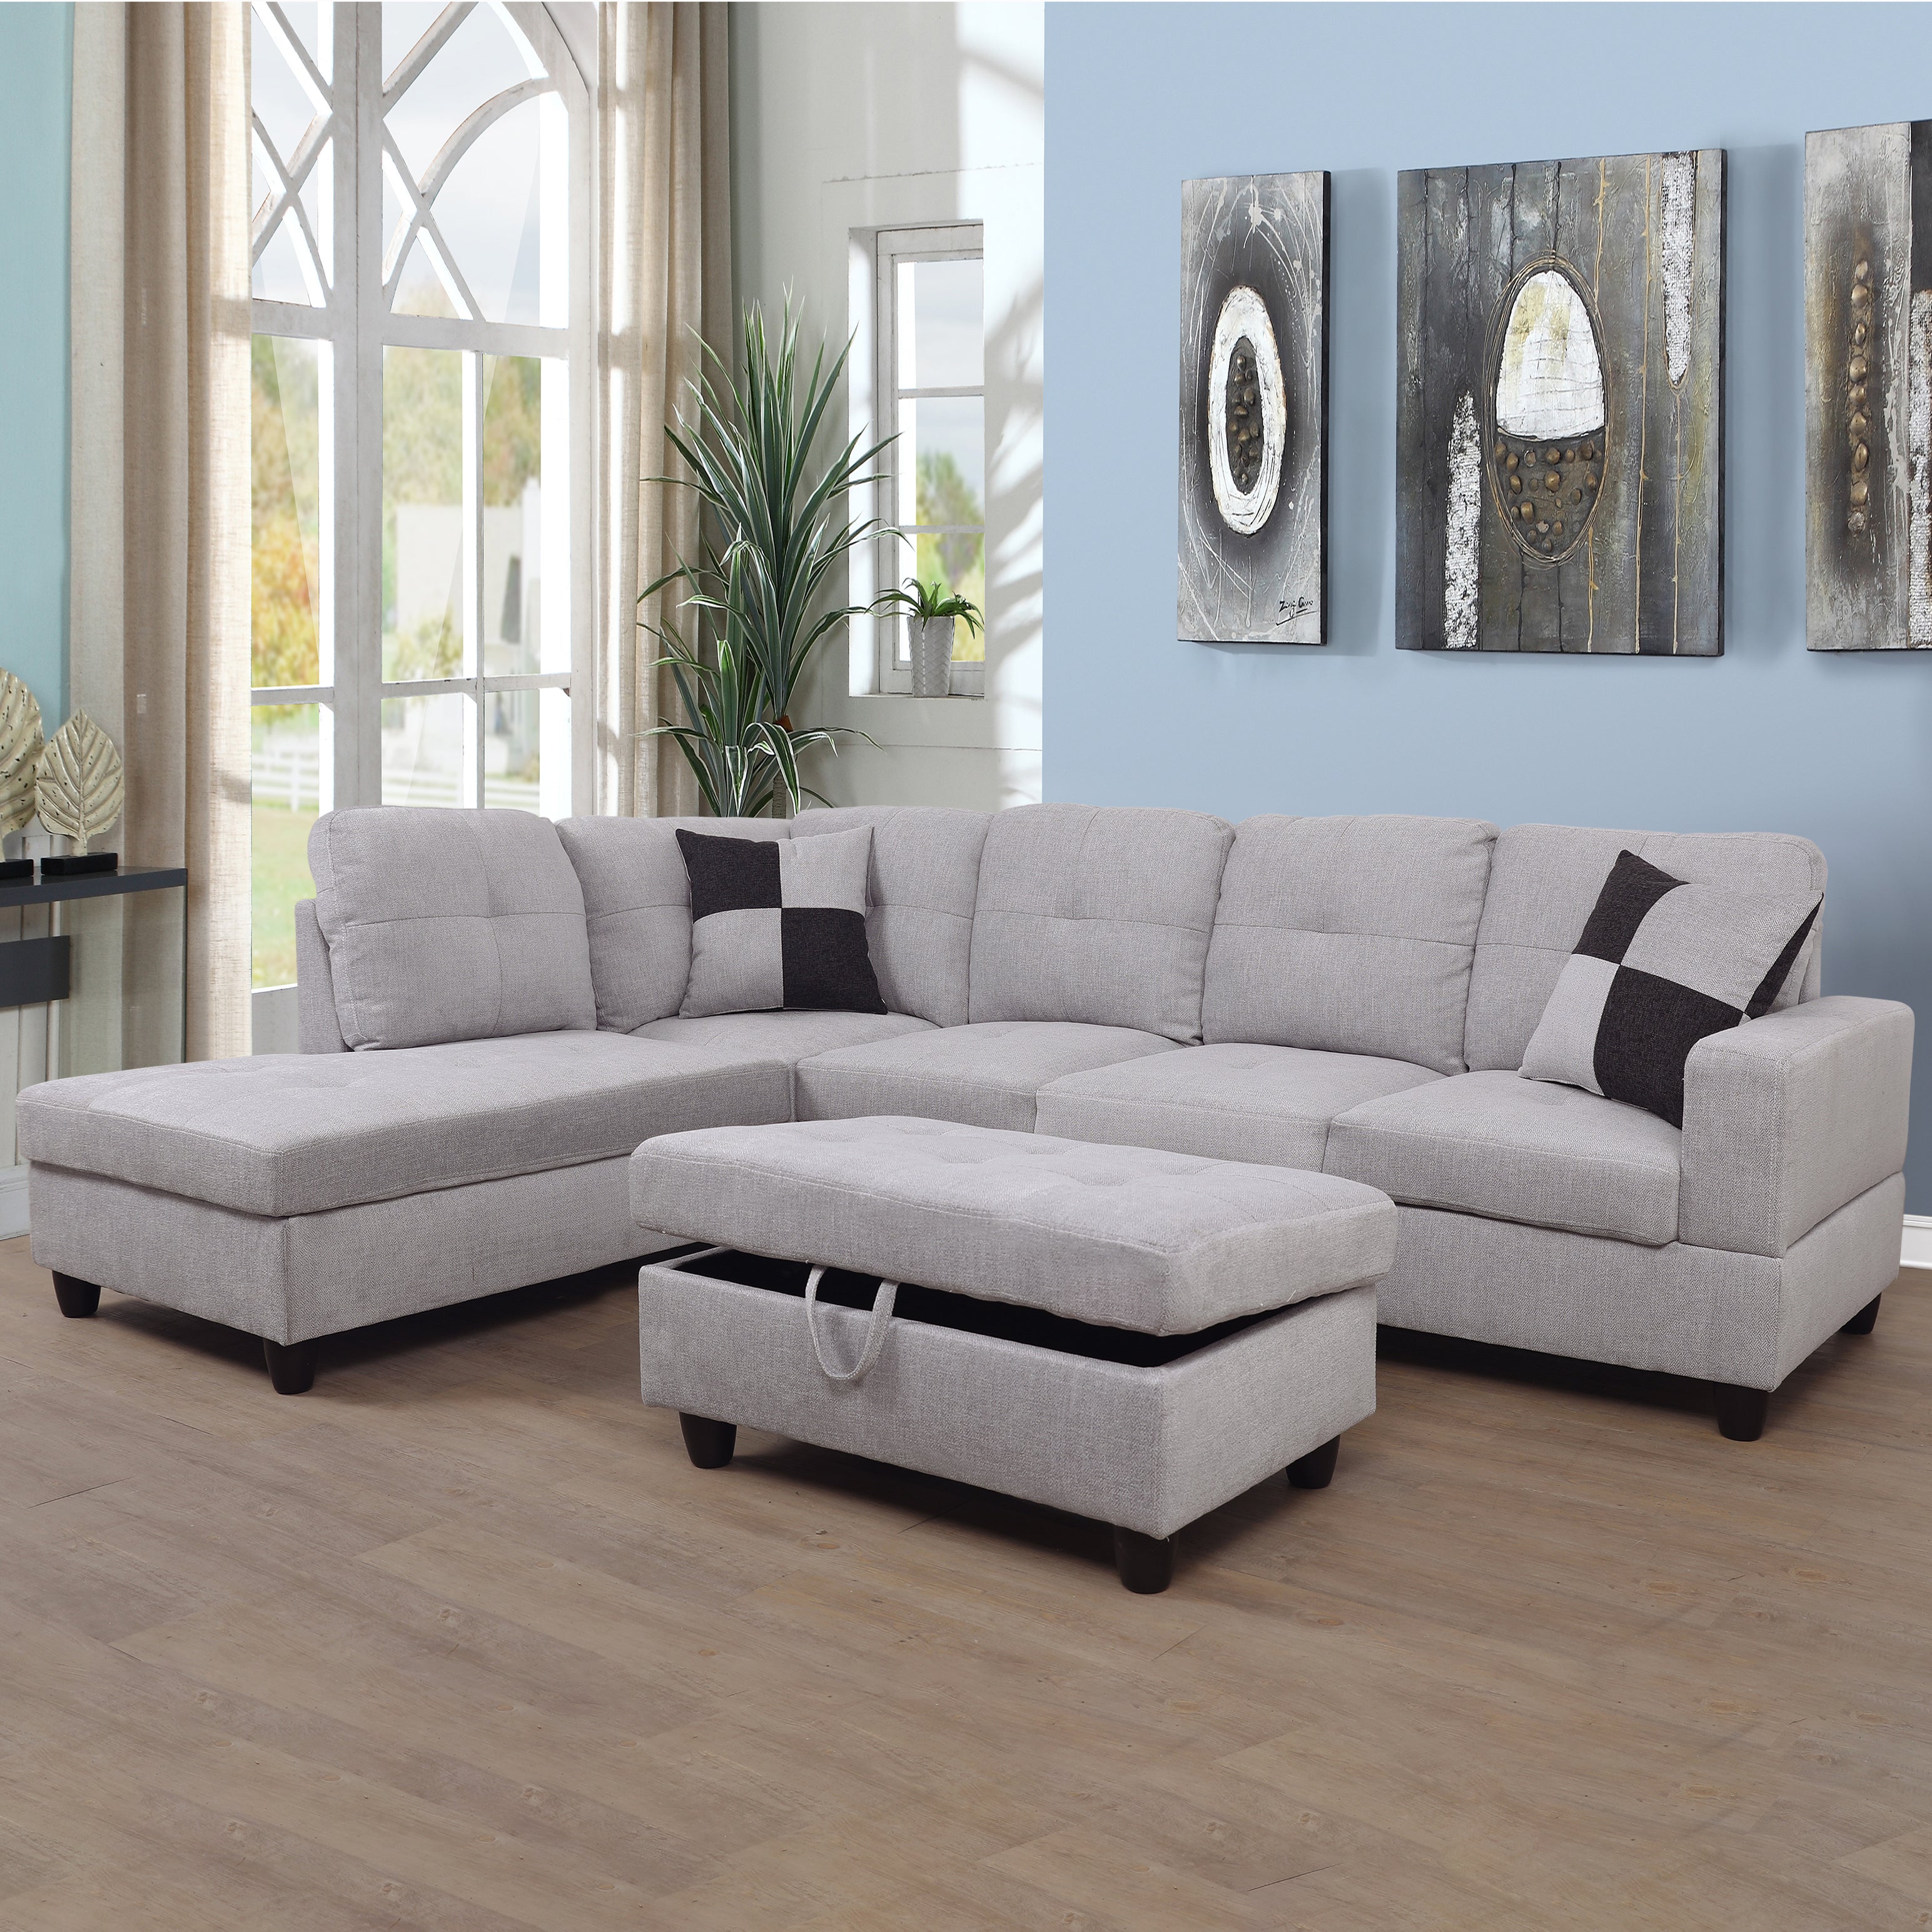 Ainehome Off-white Flannel 3-Piece Couch Living Room Sofa Set